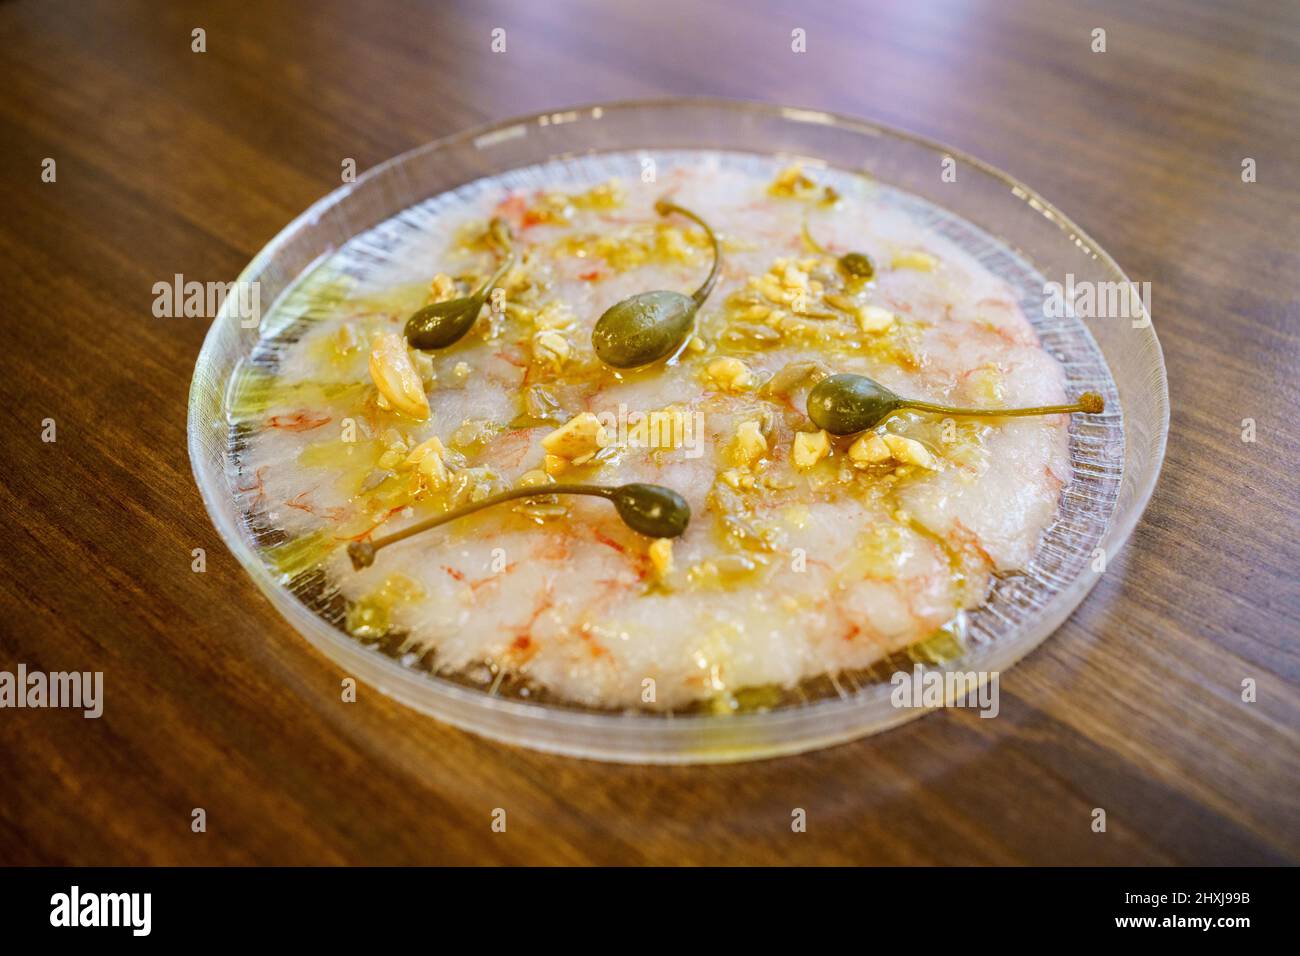 Exquisite dish with prawn carpaccio garnished with capers and nut sauce Stock Photo